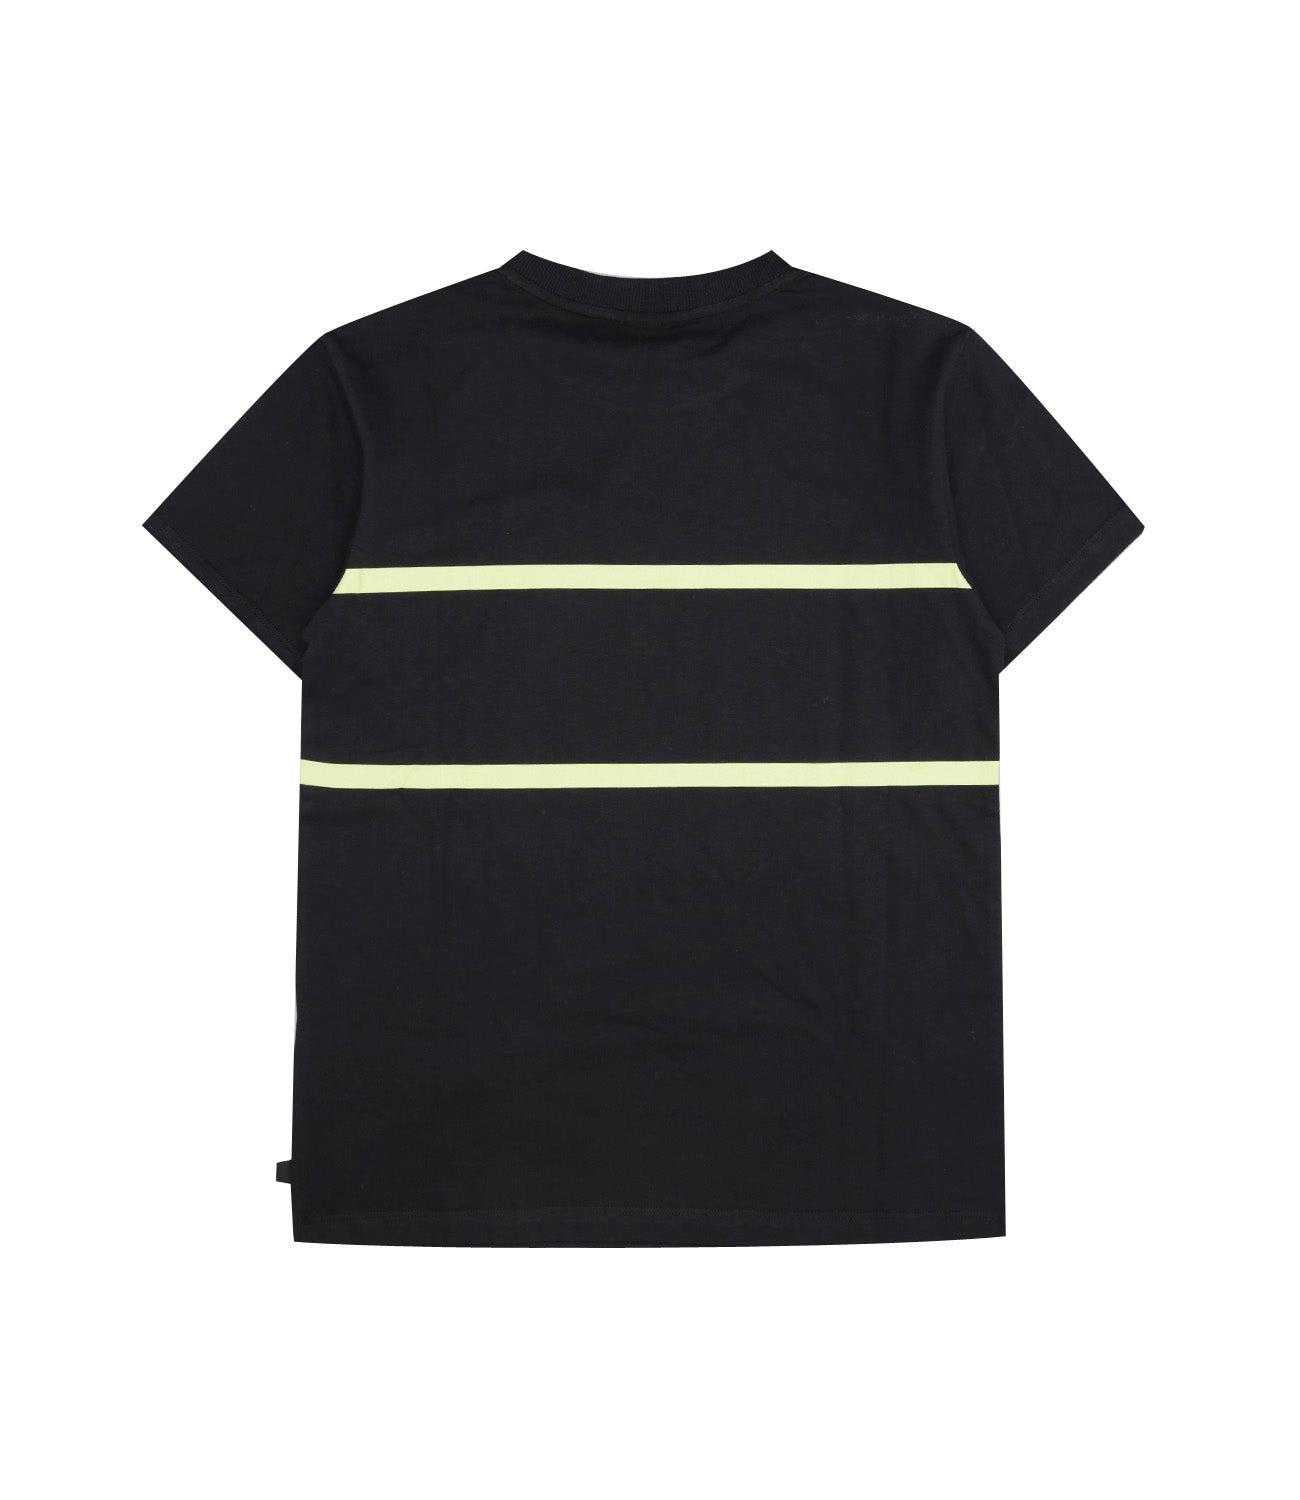 GCDS Junior | T-Shirt Black and Greenfluo